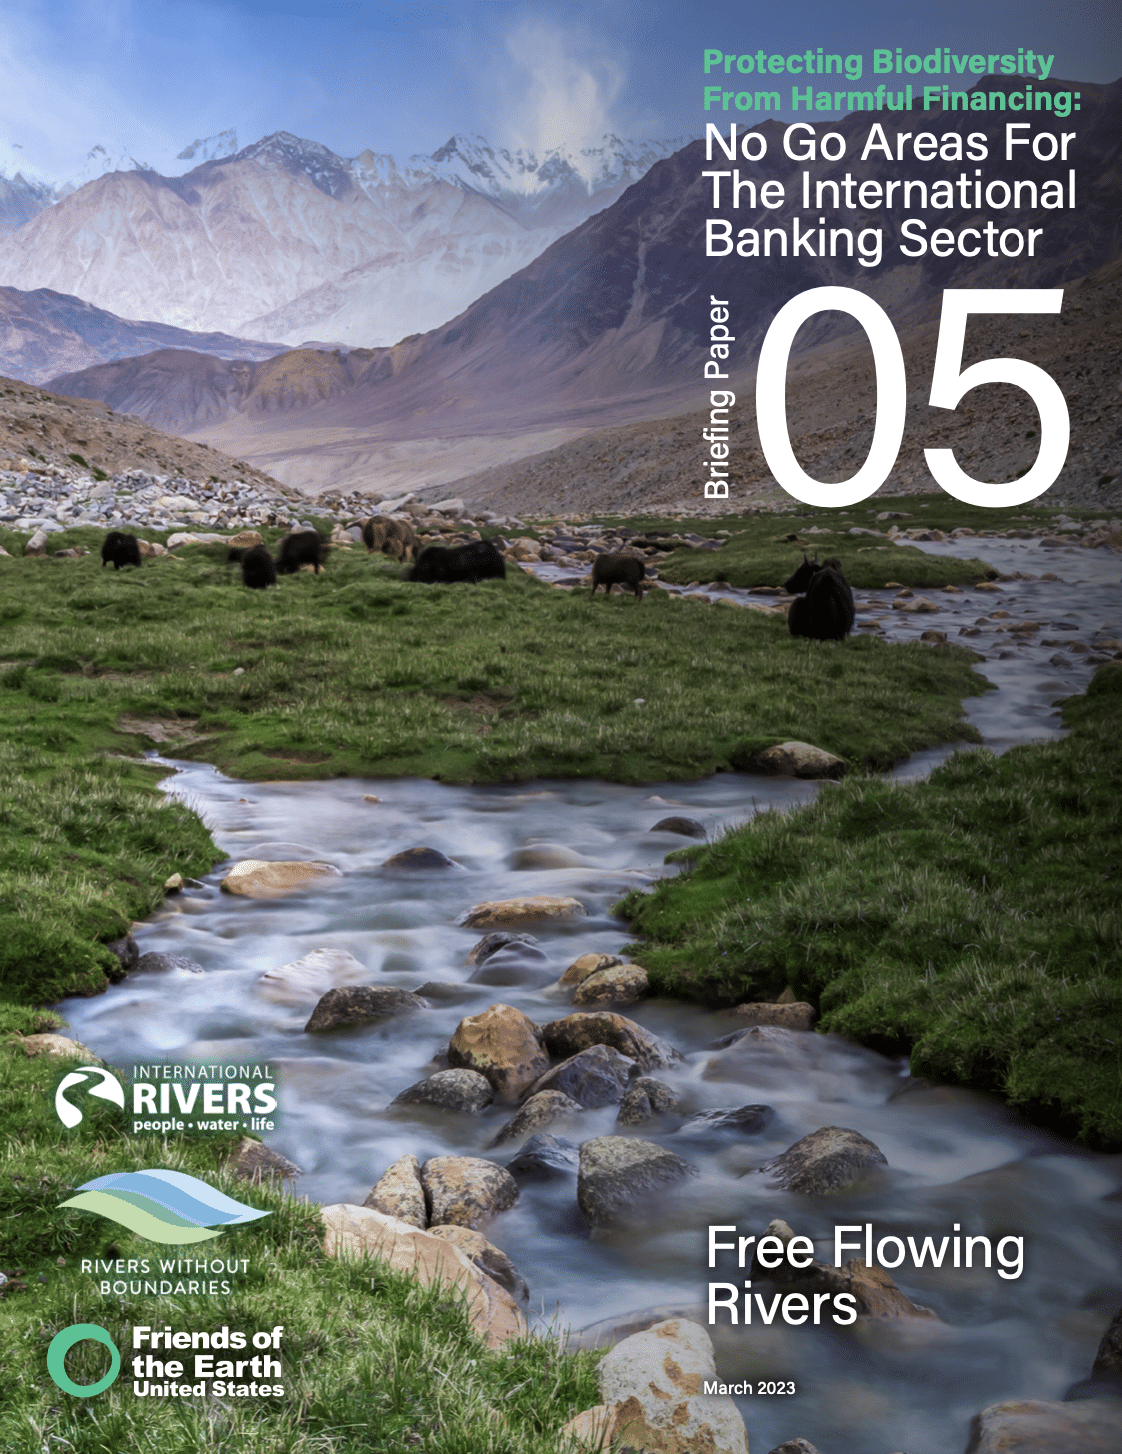 Protecting Biodiversity from Harmful Financing: No Go Areas for the International Banking Sector